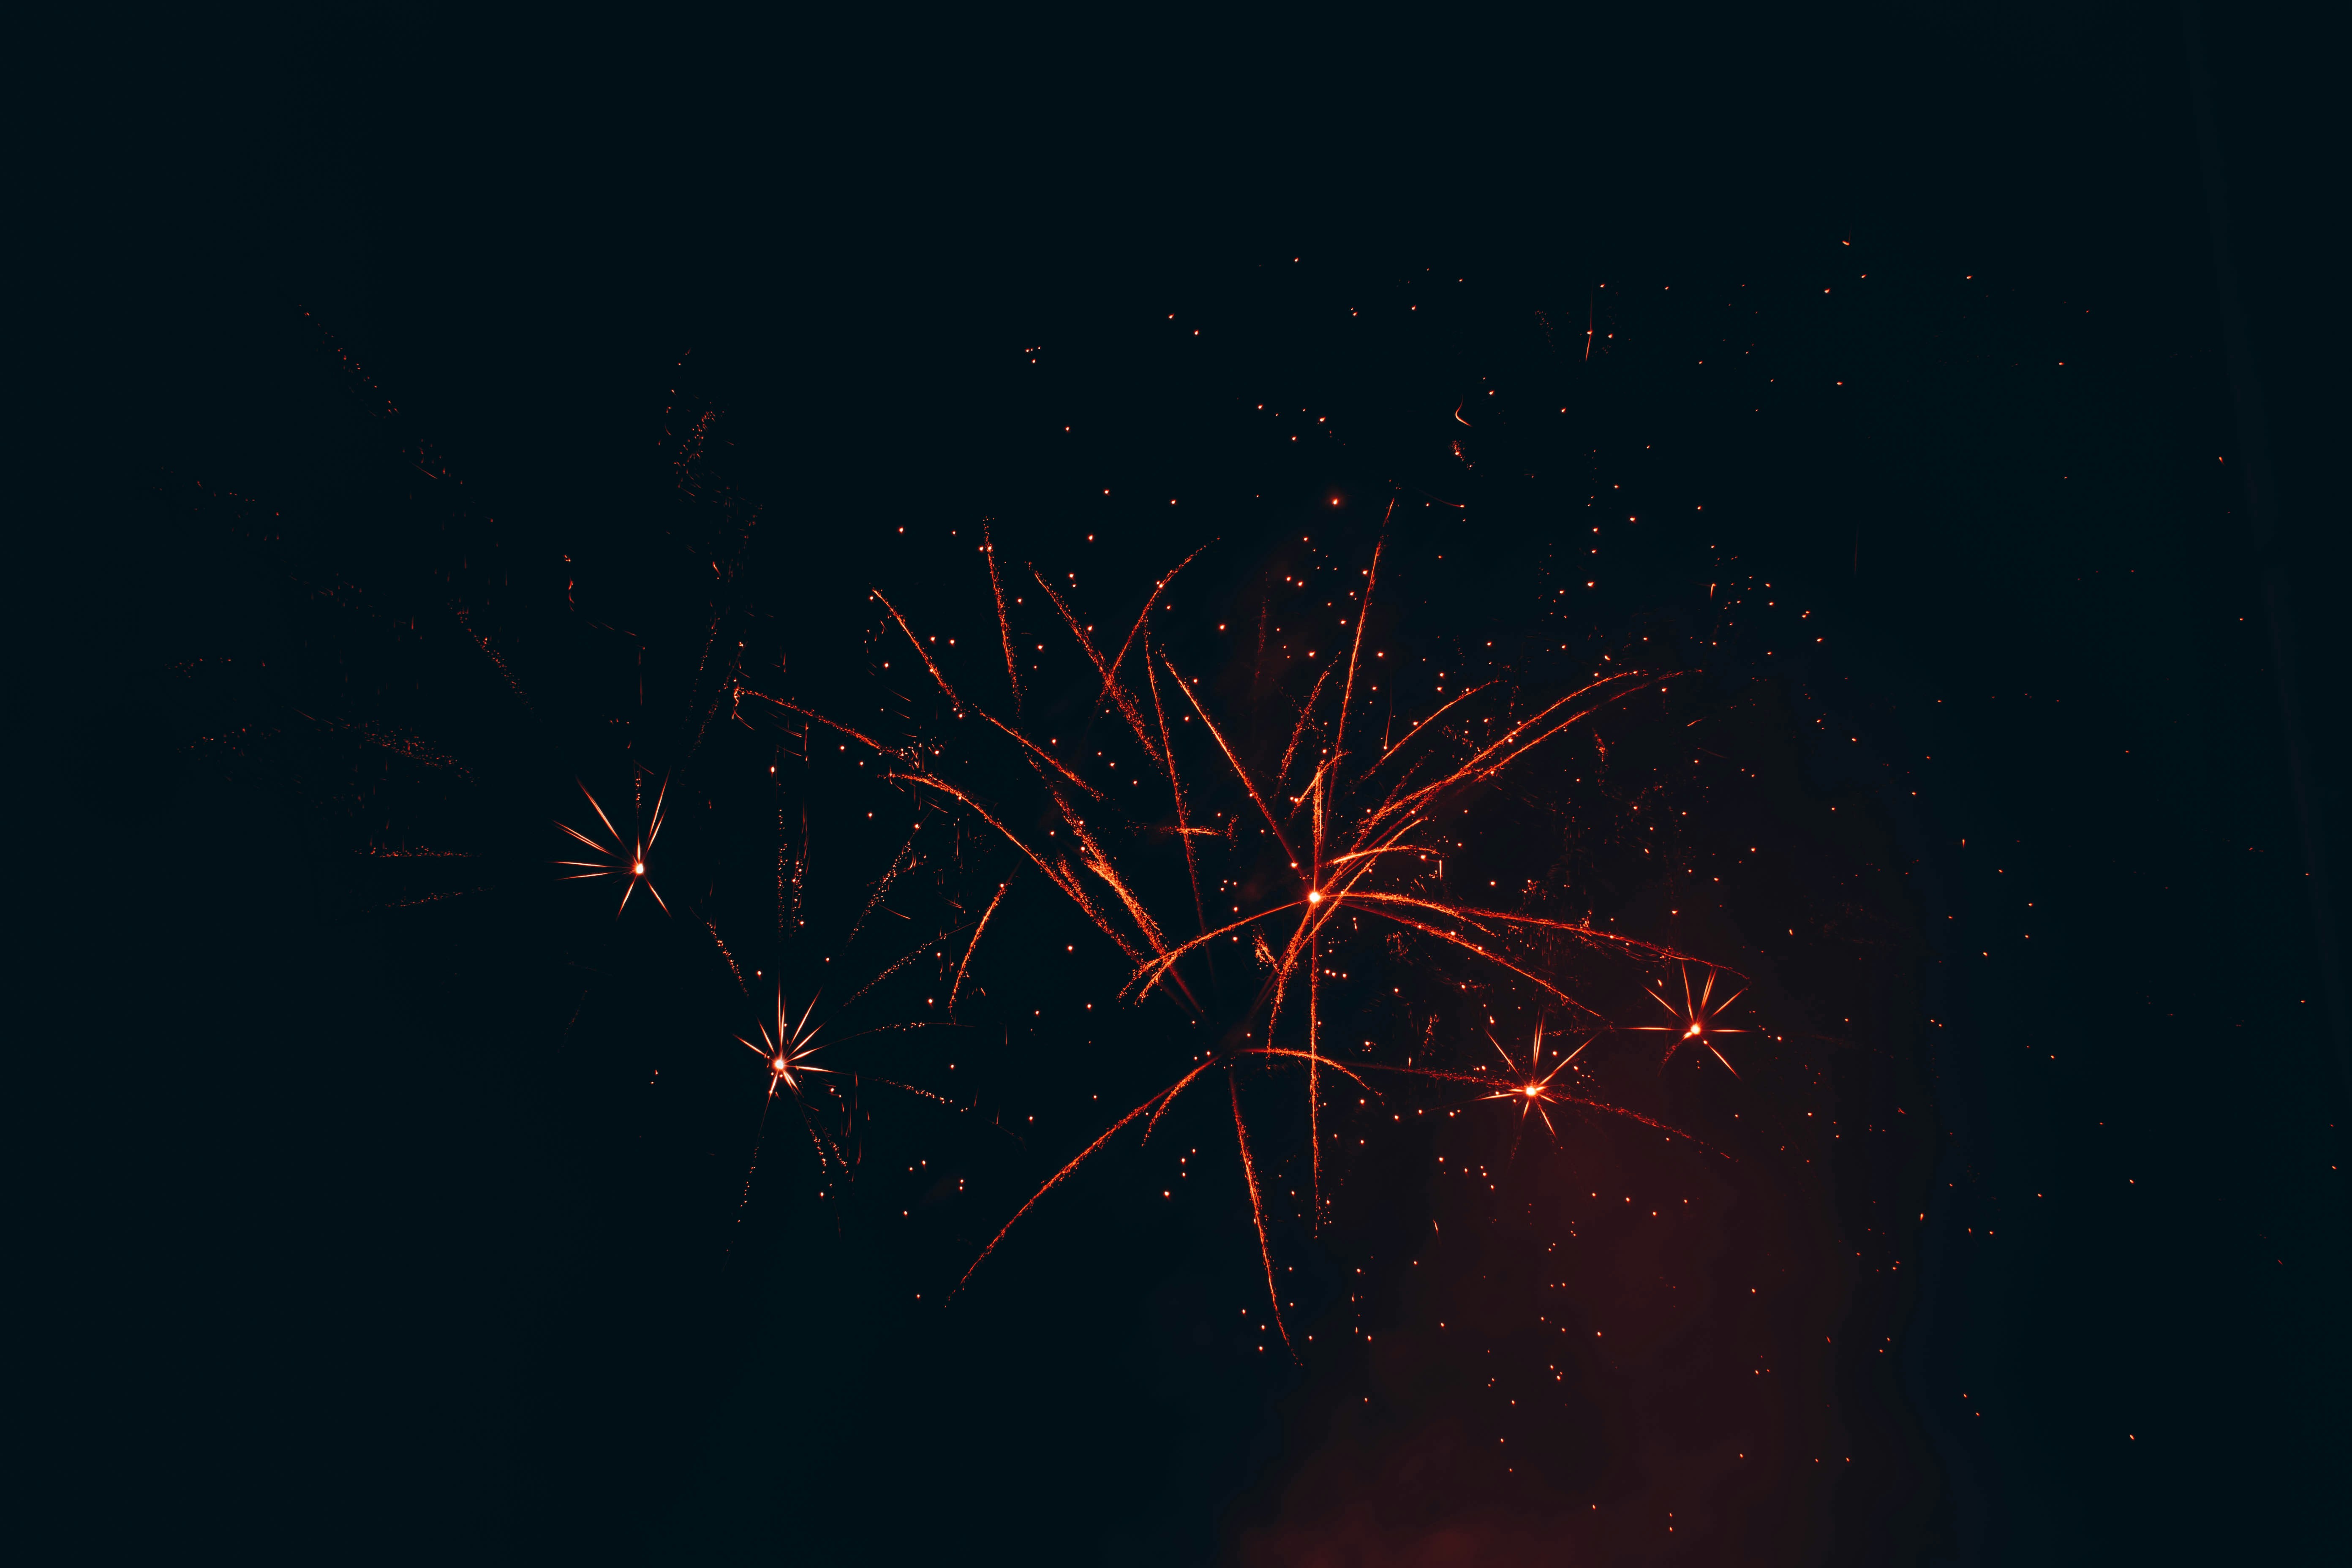 Choose from a curated selection of fireworks photos. Always free on Unsplash.